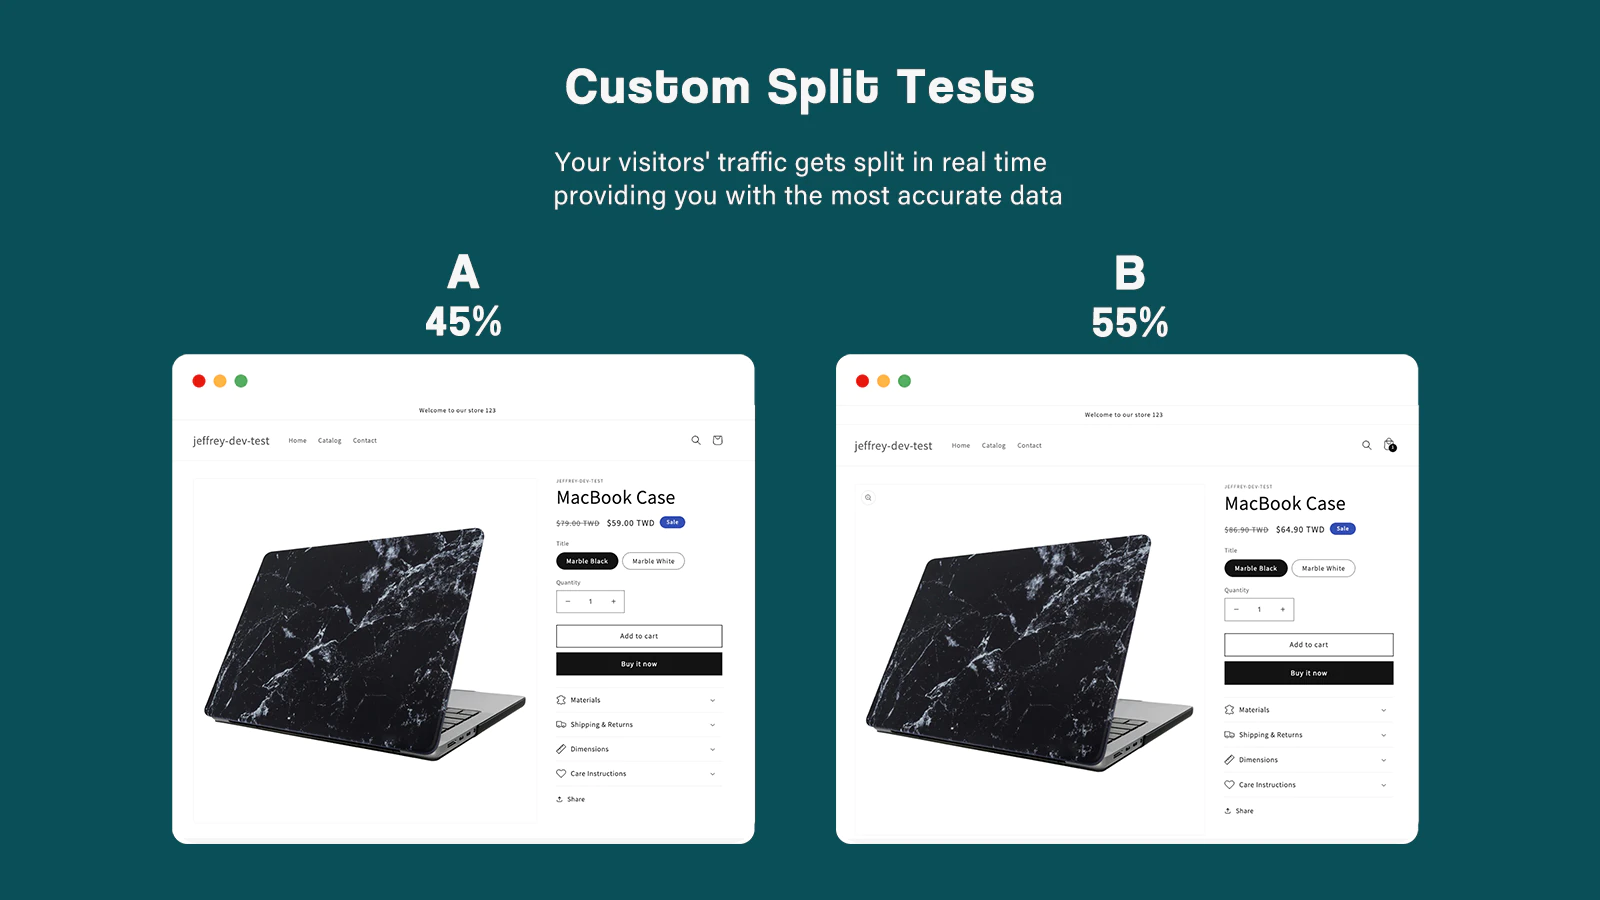 AB testing helps you test out which Shopify translation is better